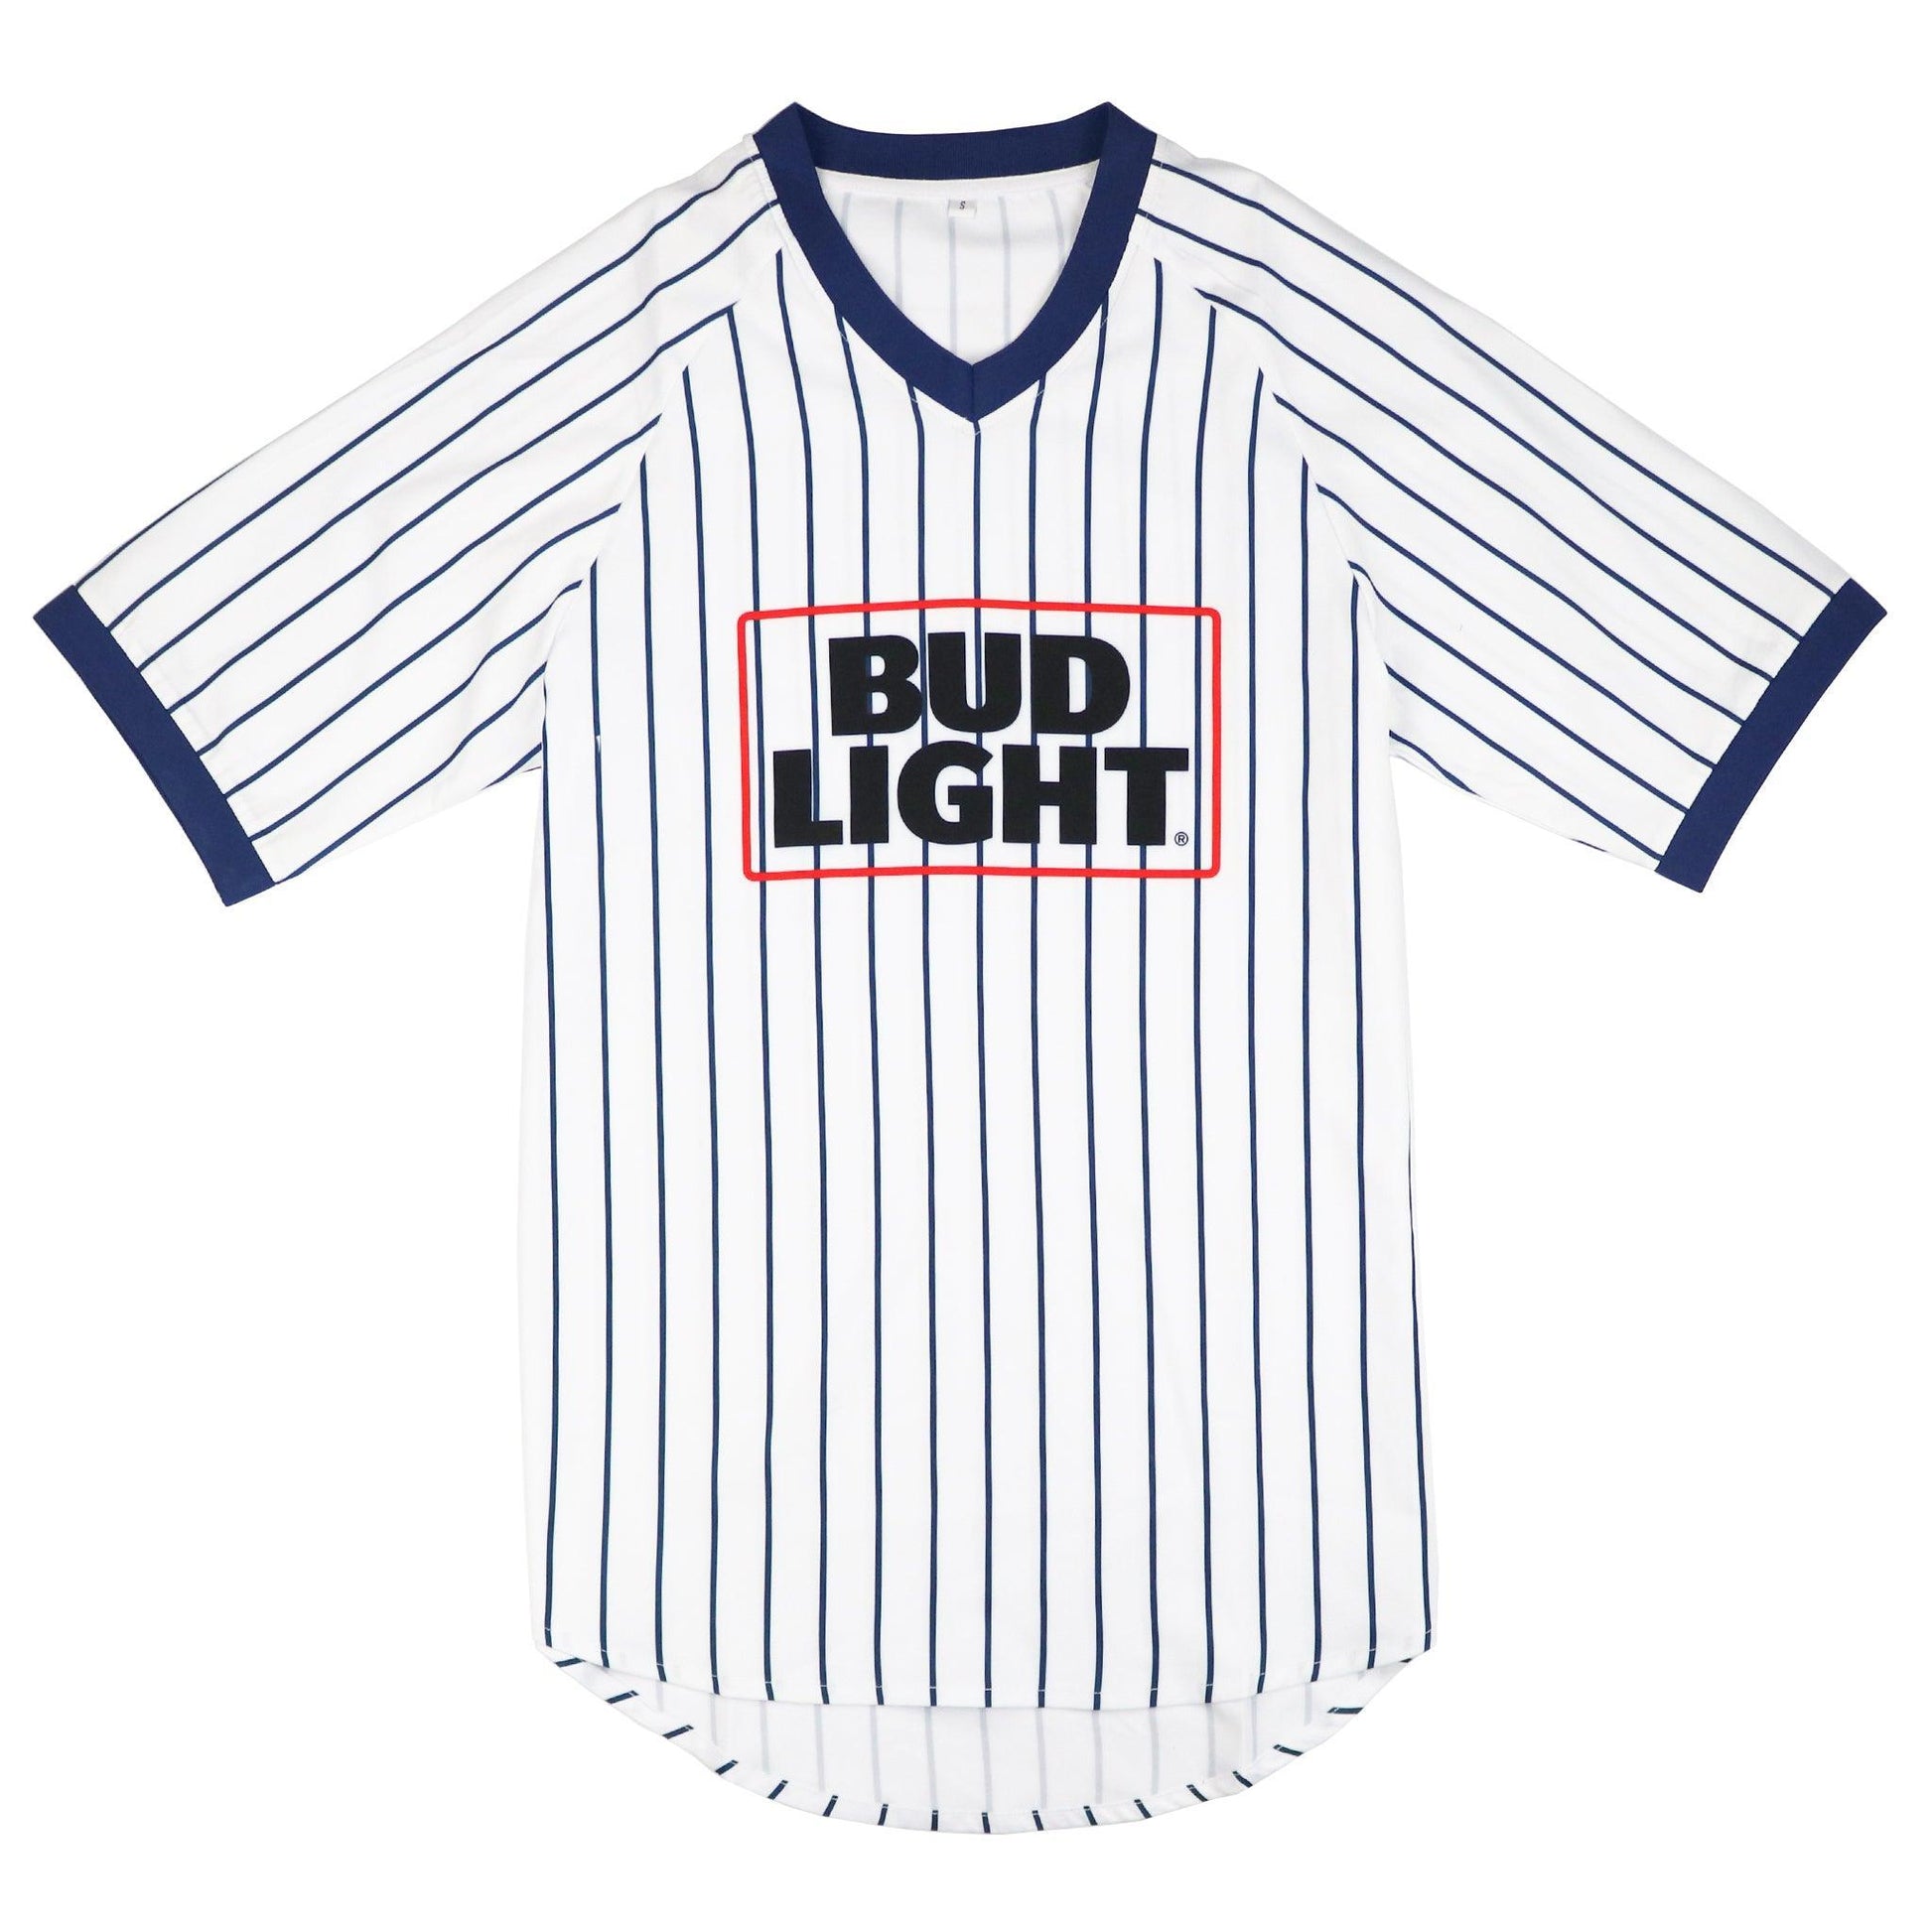 white bud light v neck striped baseball jersey with blue thin stripes and bud light logo on the center of chest